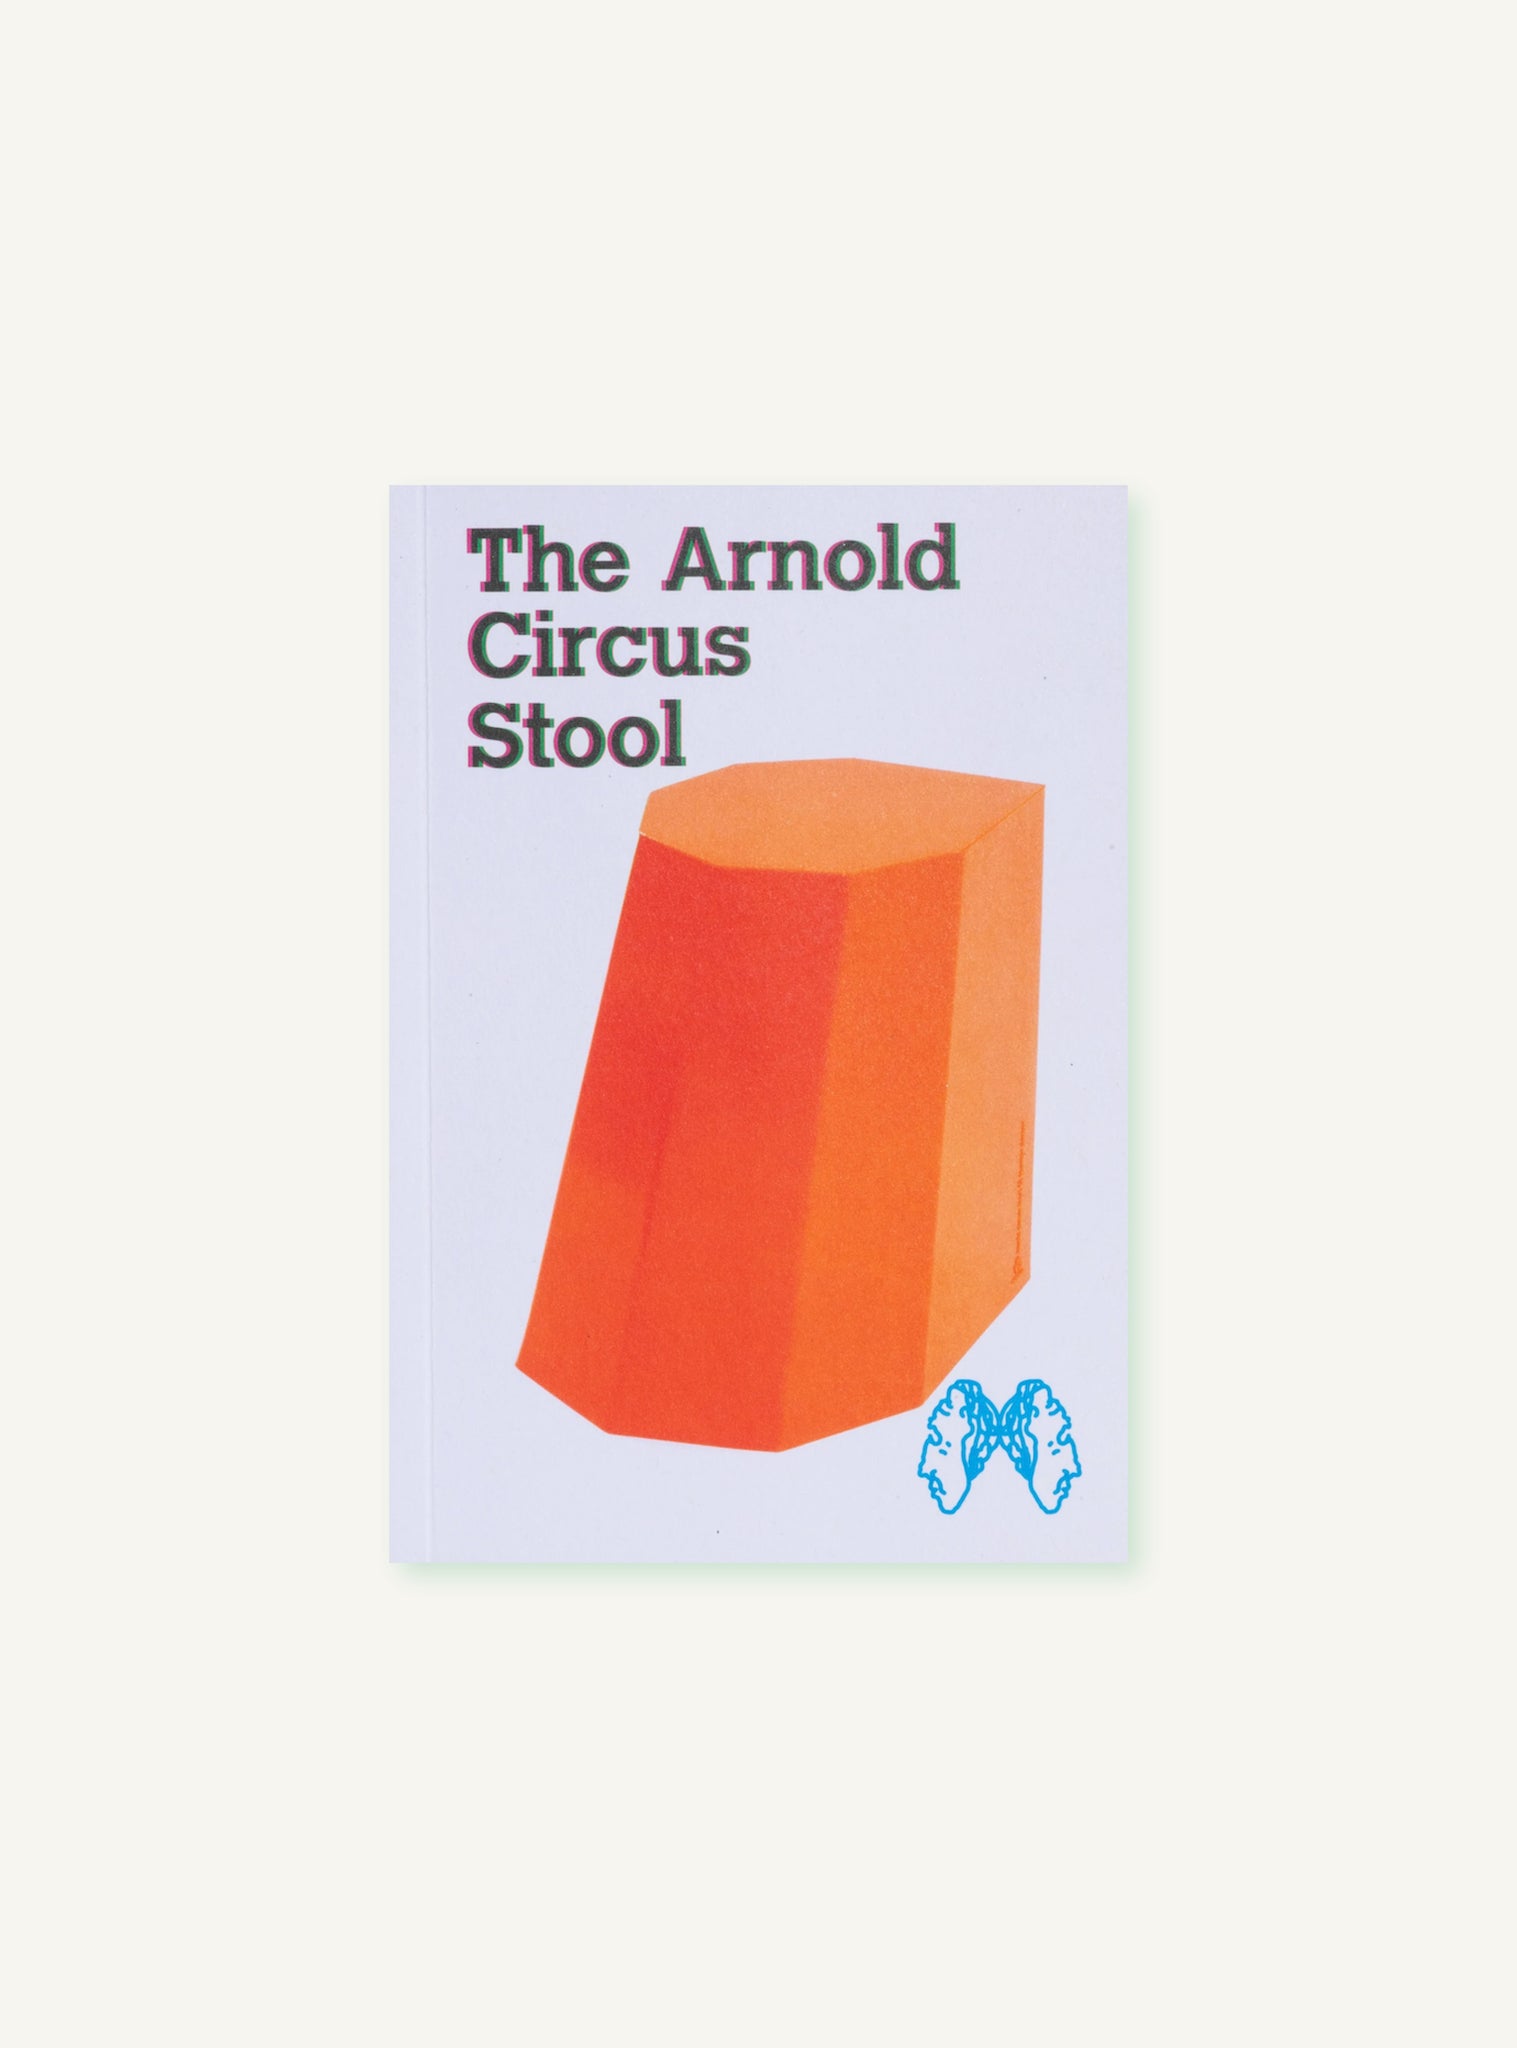 THE ARNOLD CIRCUS STOOL BOOK By Martino Gamper